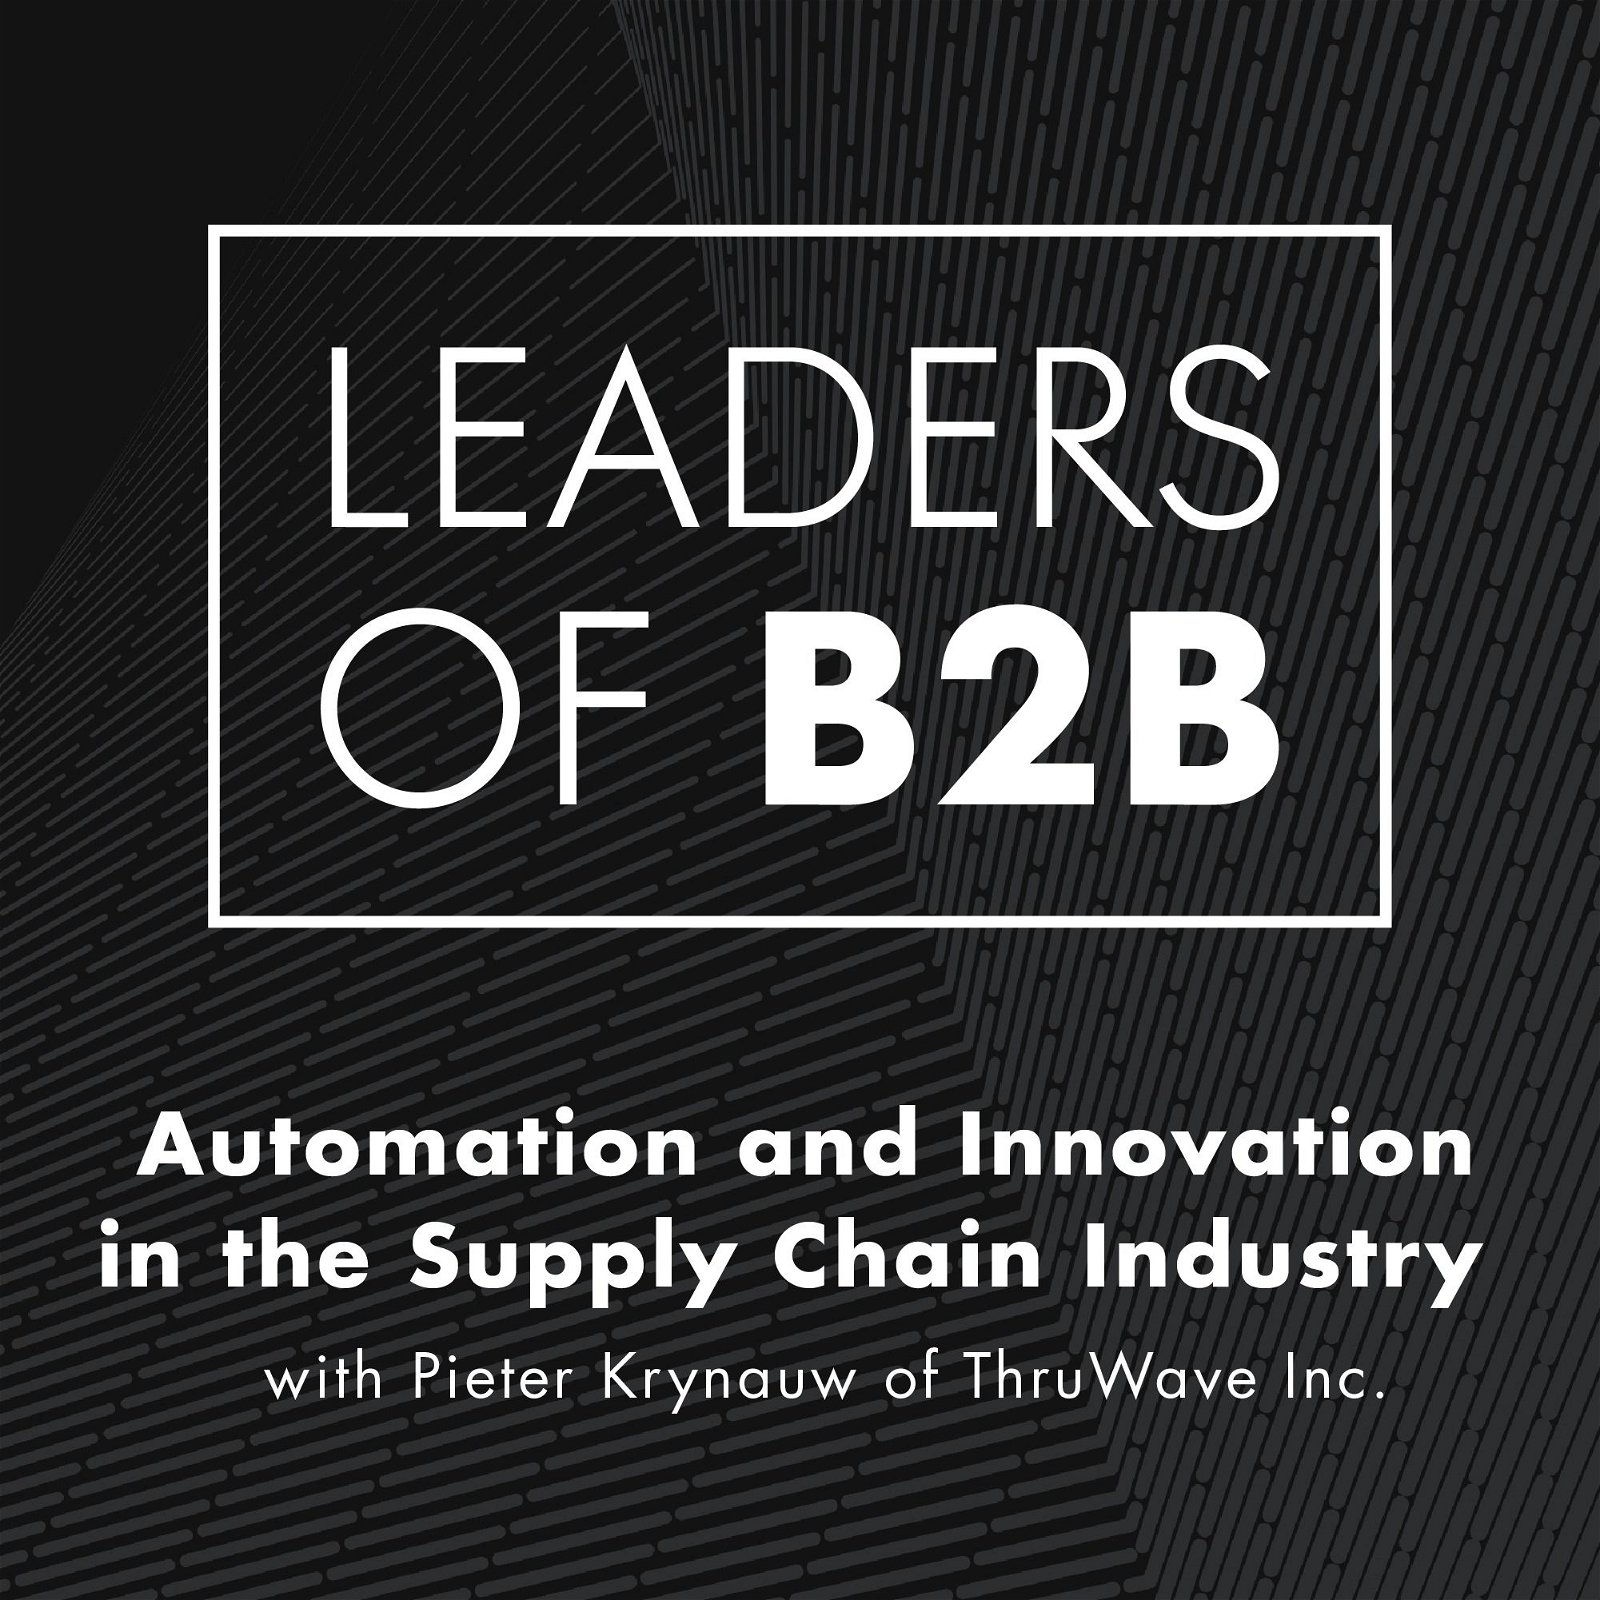 Automation and Innovation in the Supply Chain Industry with Pieter Krynauw of ThruWave Inc.